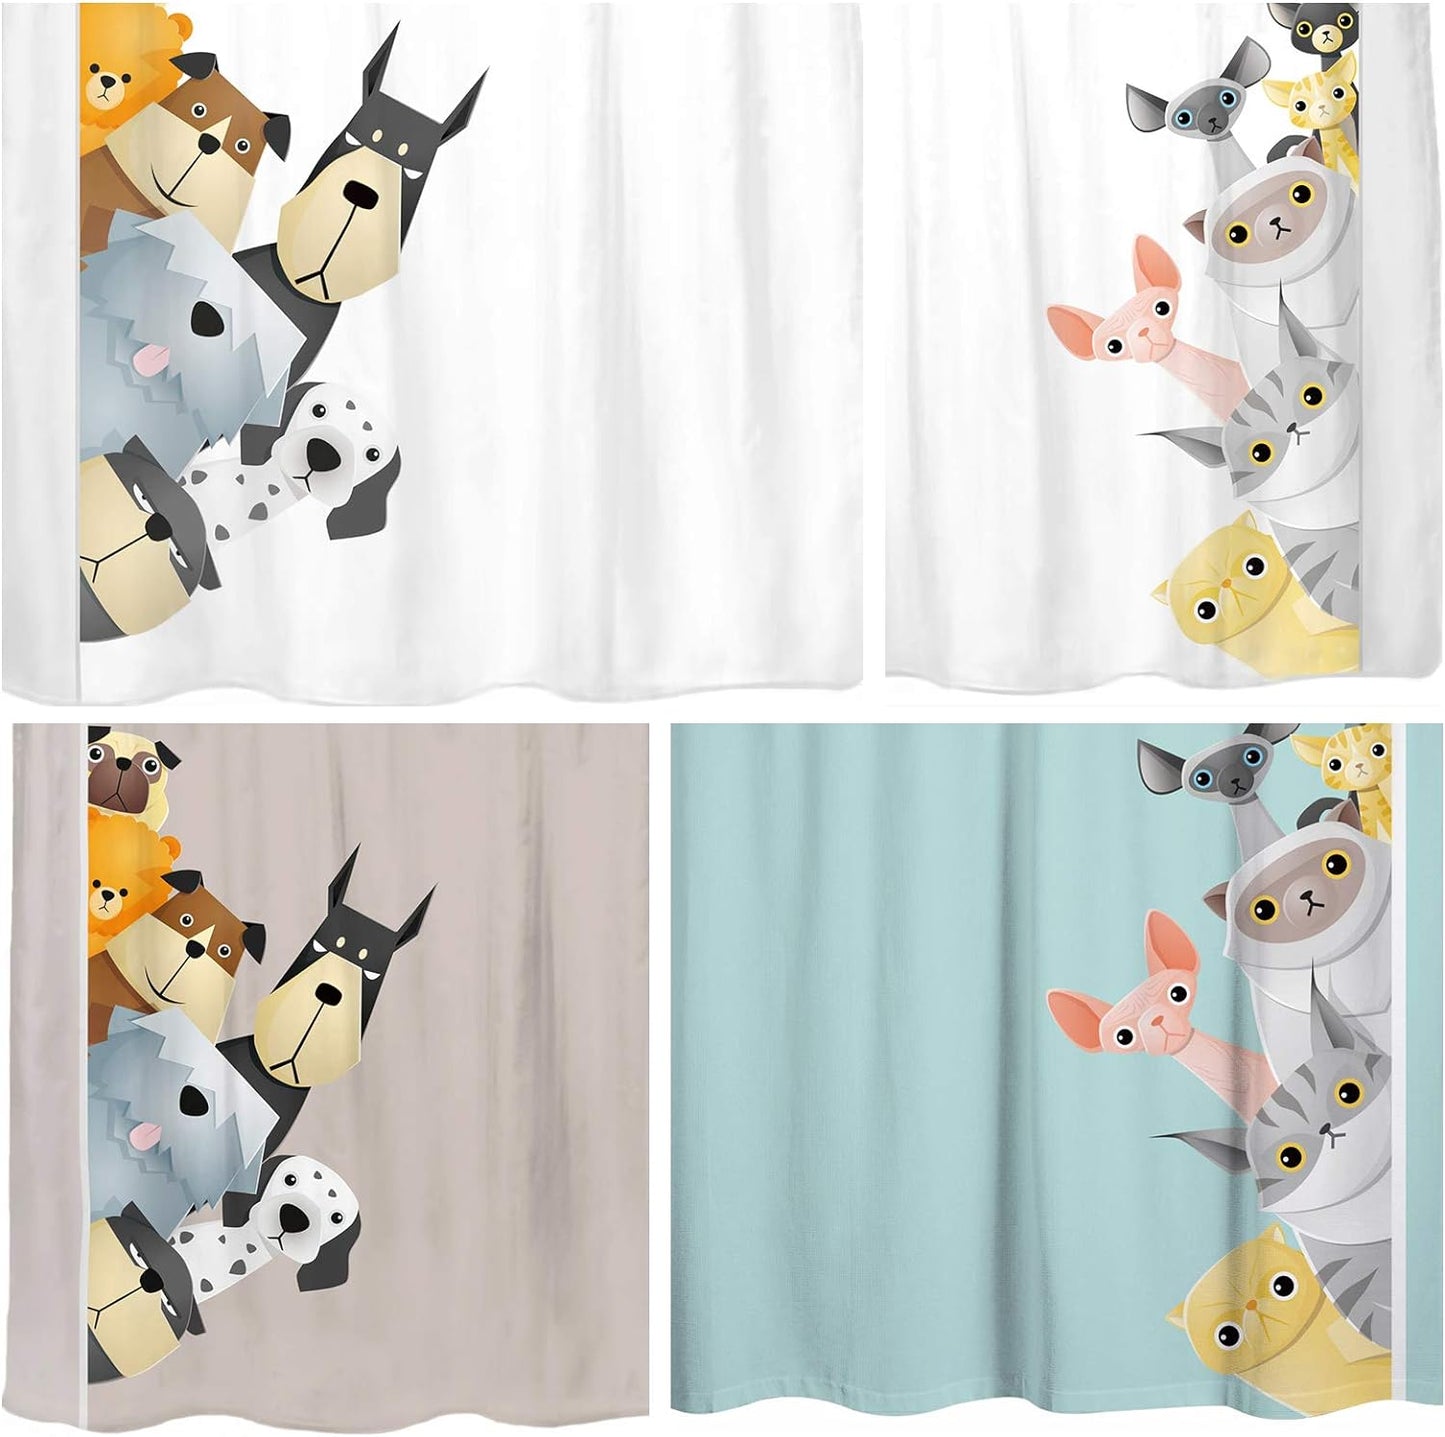 Sunlit Peekaboo Cute Dogs Curious Cartoon Puppy Fabric Shower Curtain for Kids Dogs Lovers, Tawny with Dalmatian Bulldog Pug Poodle Beagle, White